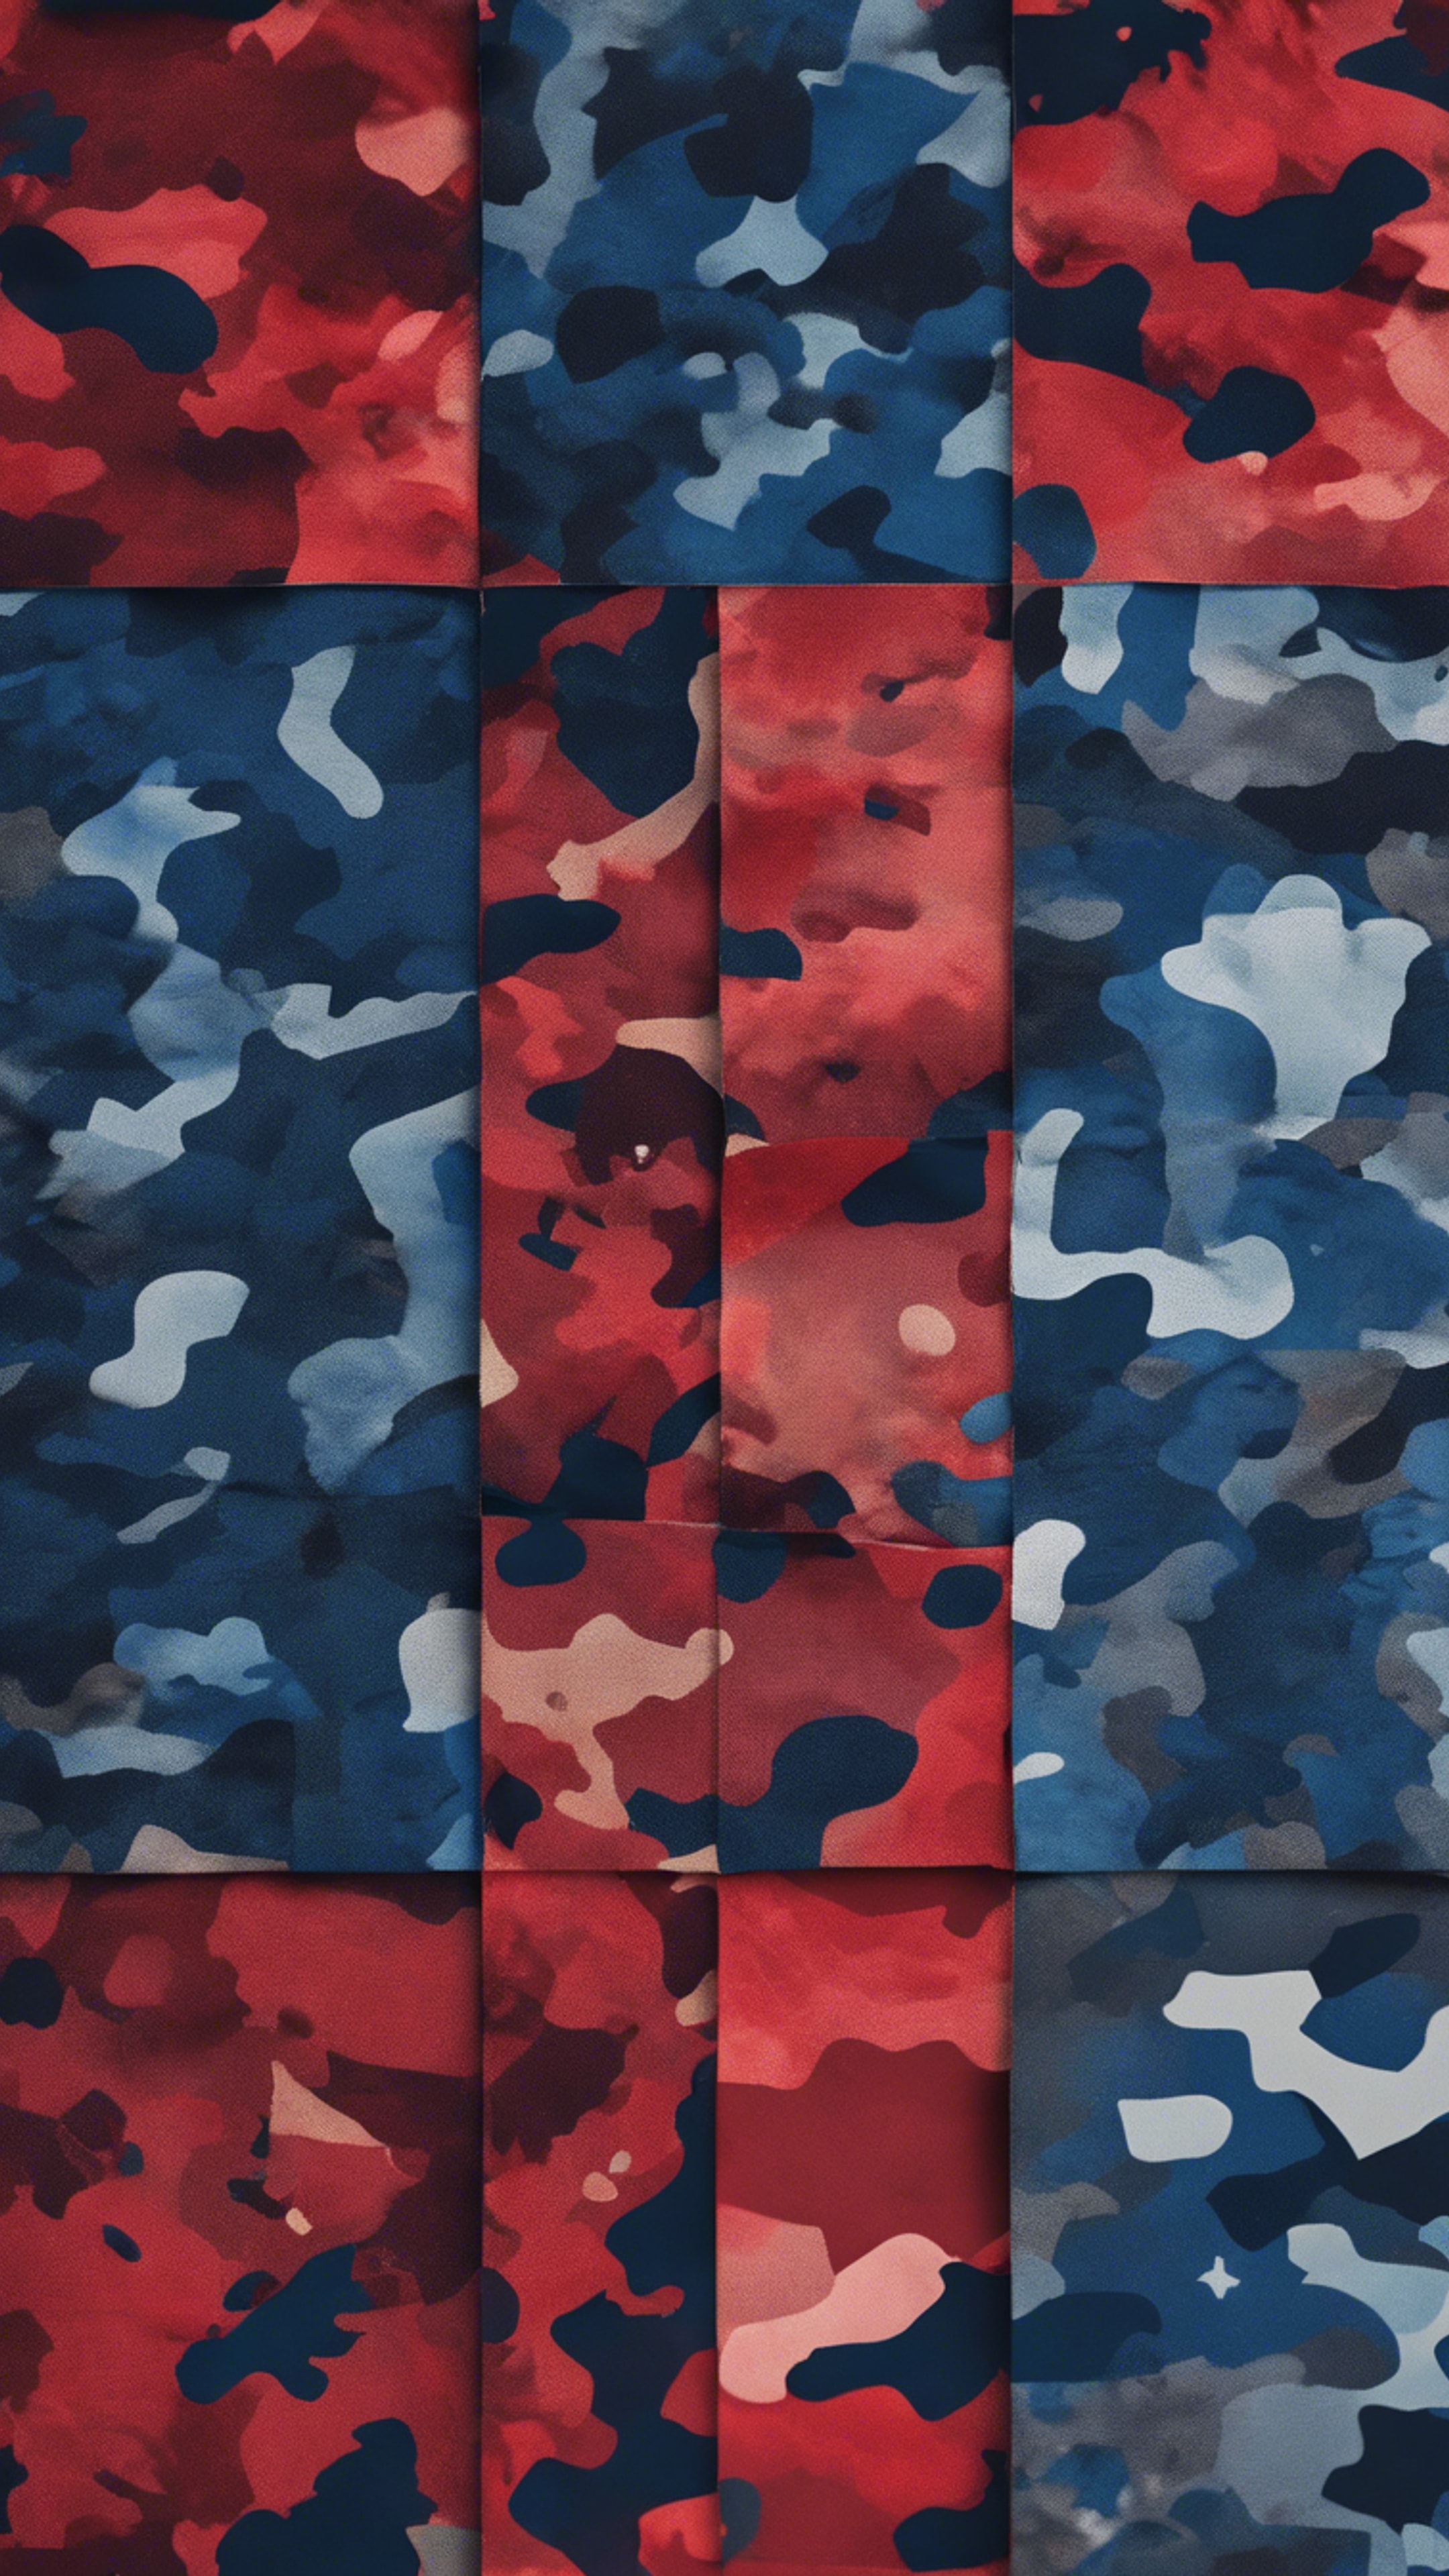 Wide patches of red and blue in a modernized camouflage pattern. Hintergrund[bf2d18a8e46c447ea6e3]